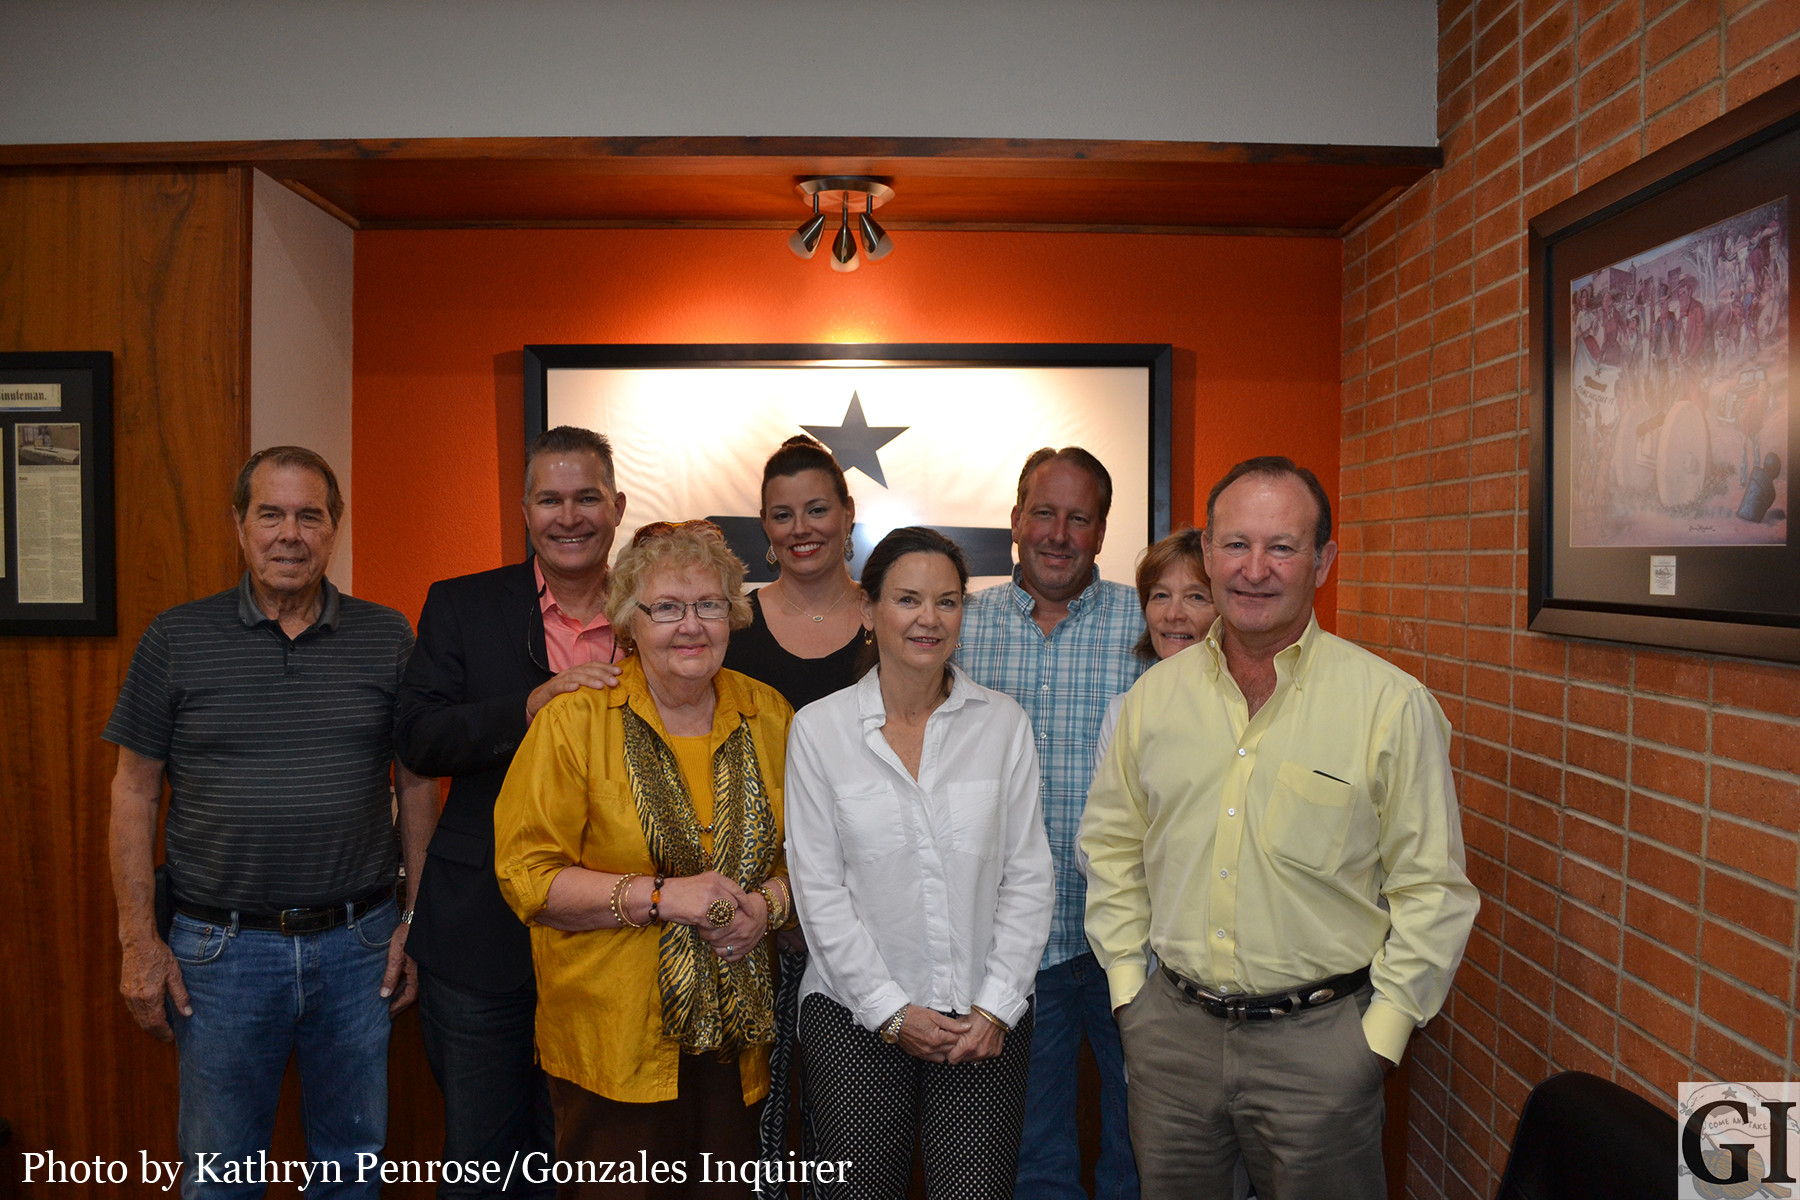 The Gonzales Convention and Visitor Bureau is pleased to announce the new Director of Tourism will be Clint Hill, owner of several local bed and breakfast venues. Hill, at far right, is pictured with the GCVB Board of Directors. He is expected to formally vacate his director's seat next month.